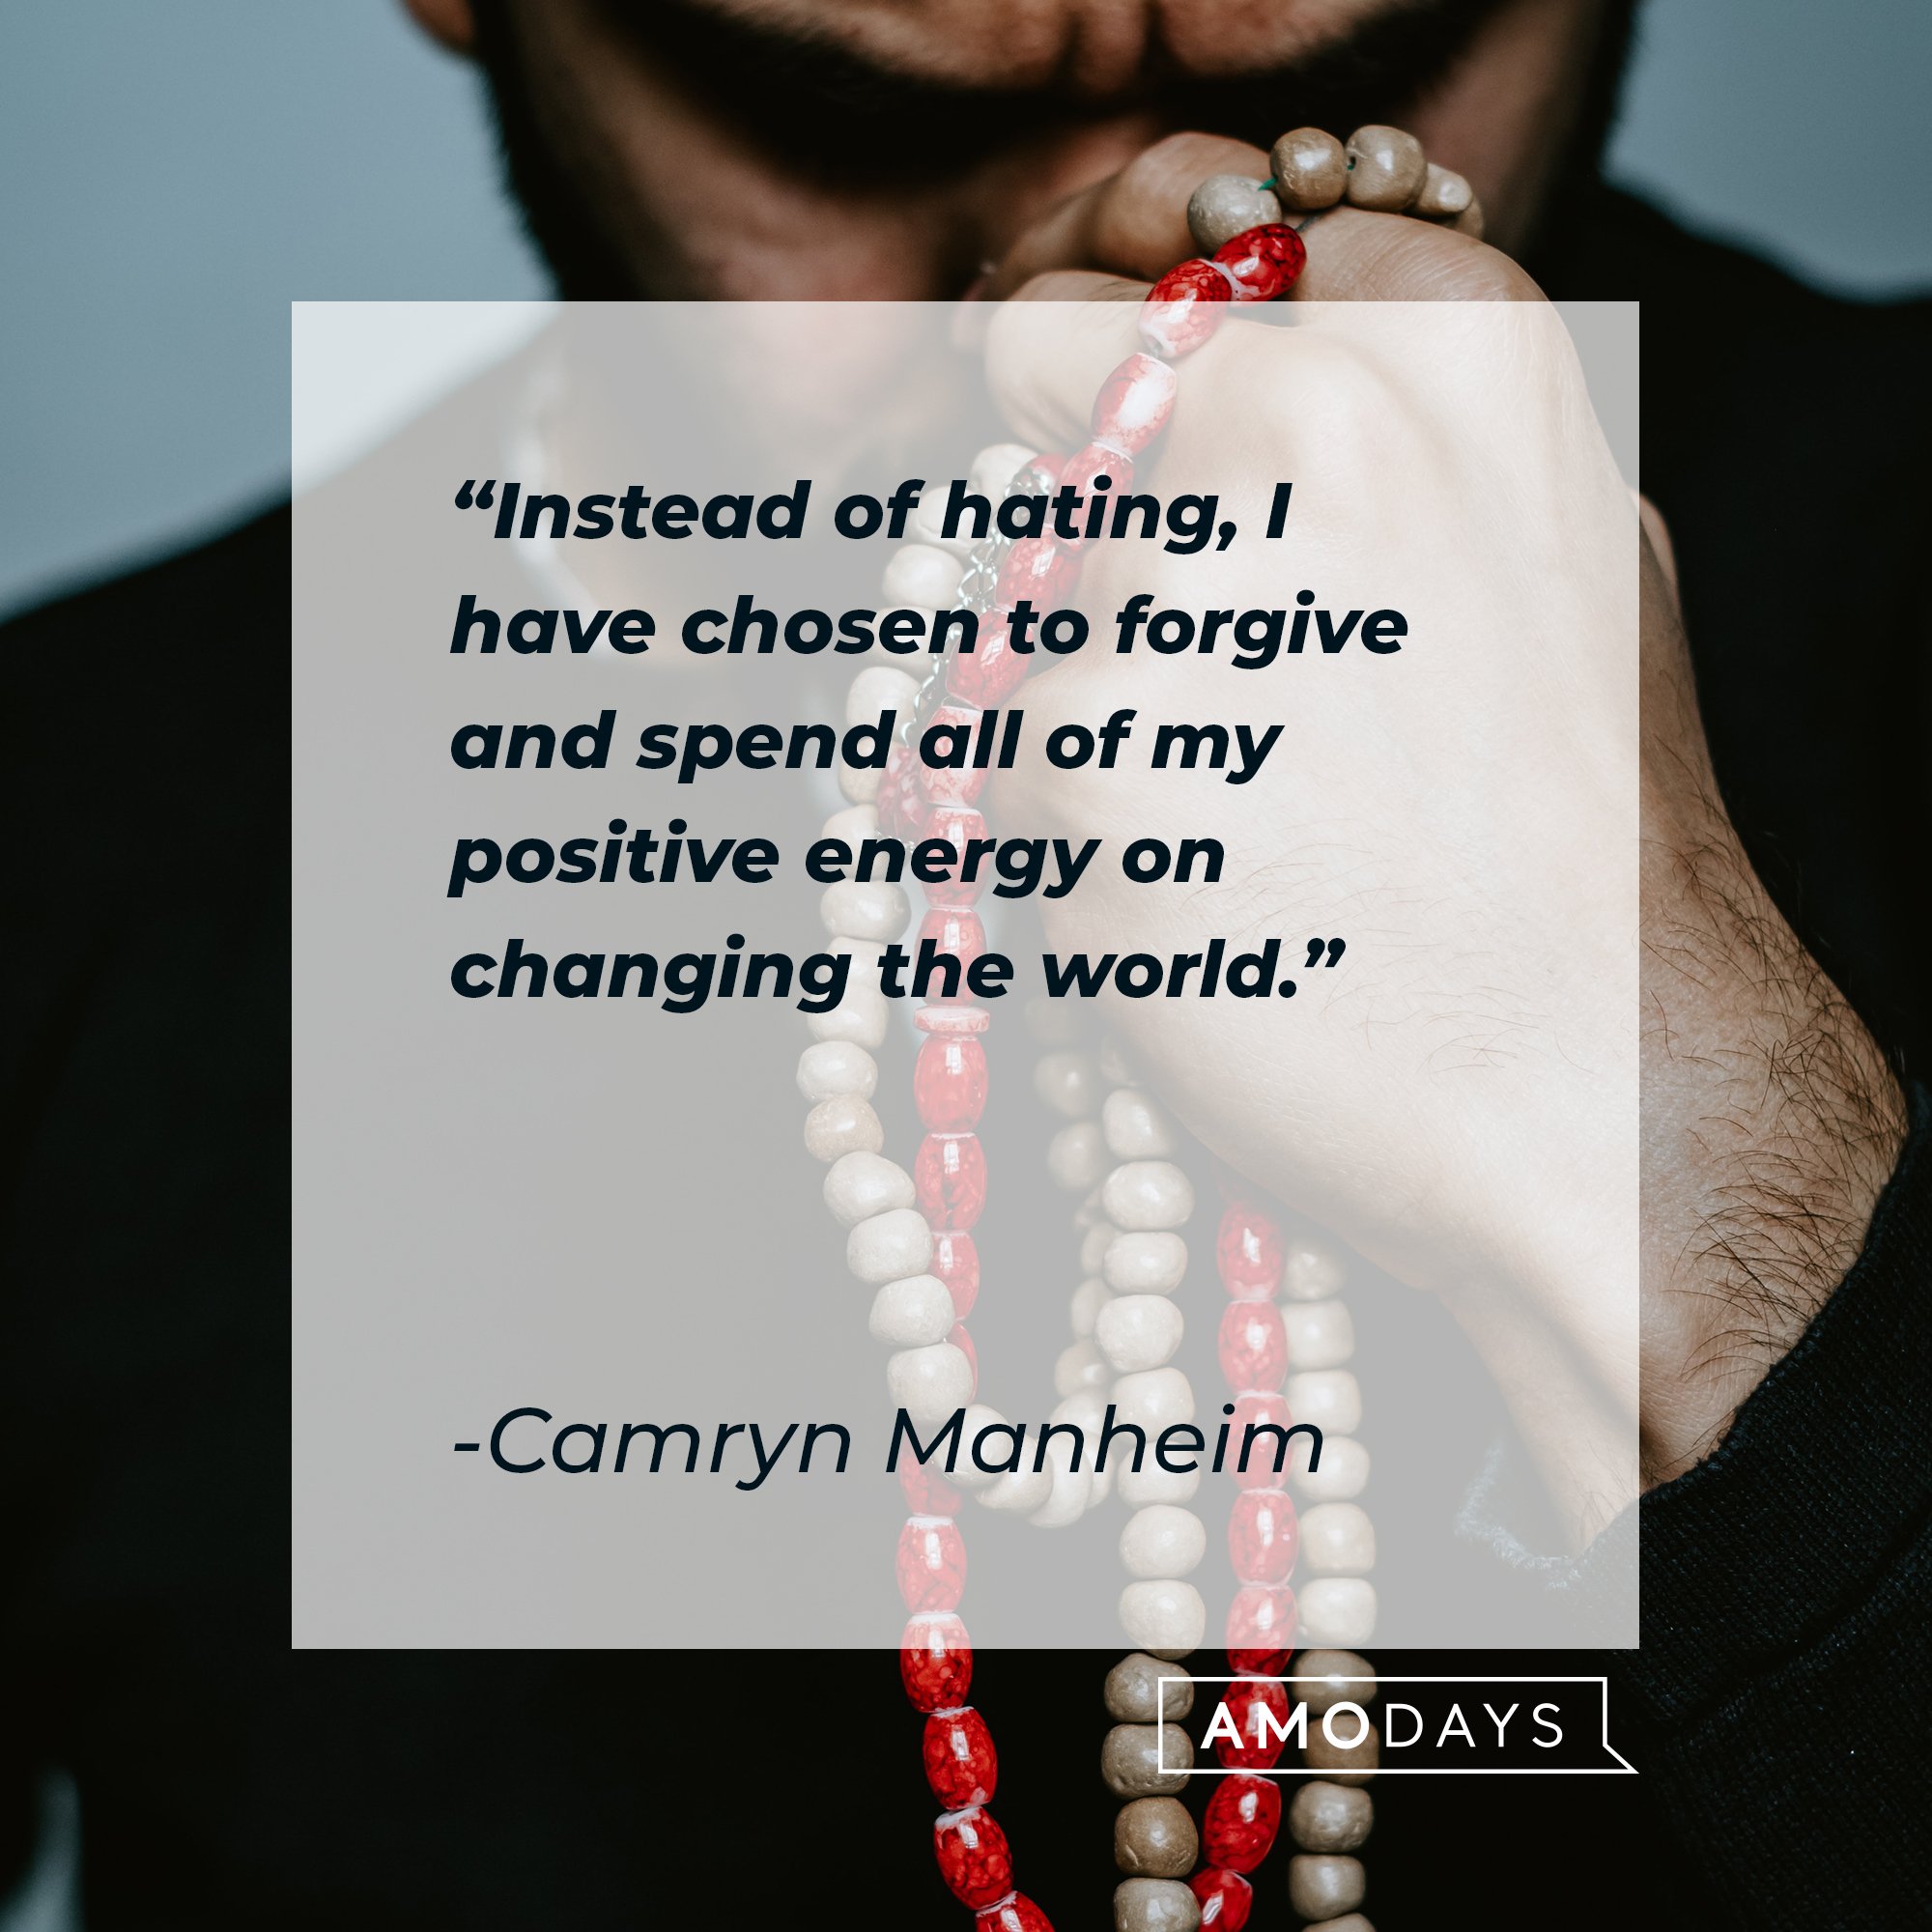 Camryn Manheim’s quote: "Instead of hating, I have chosen to forgive and spend all of my positive energy on changing the world." | Image: AmoDays 